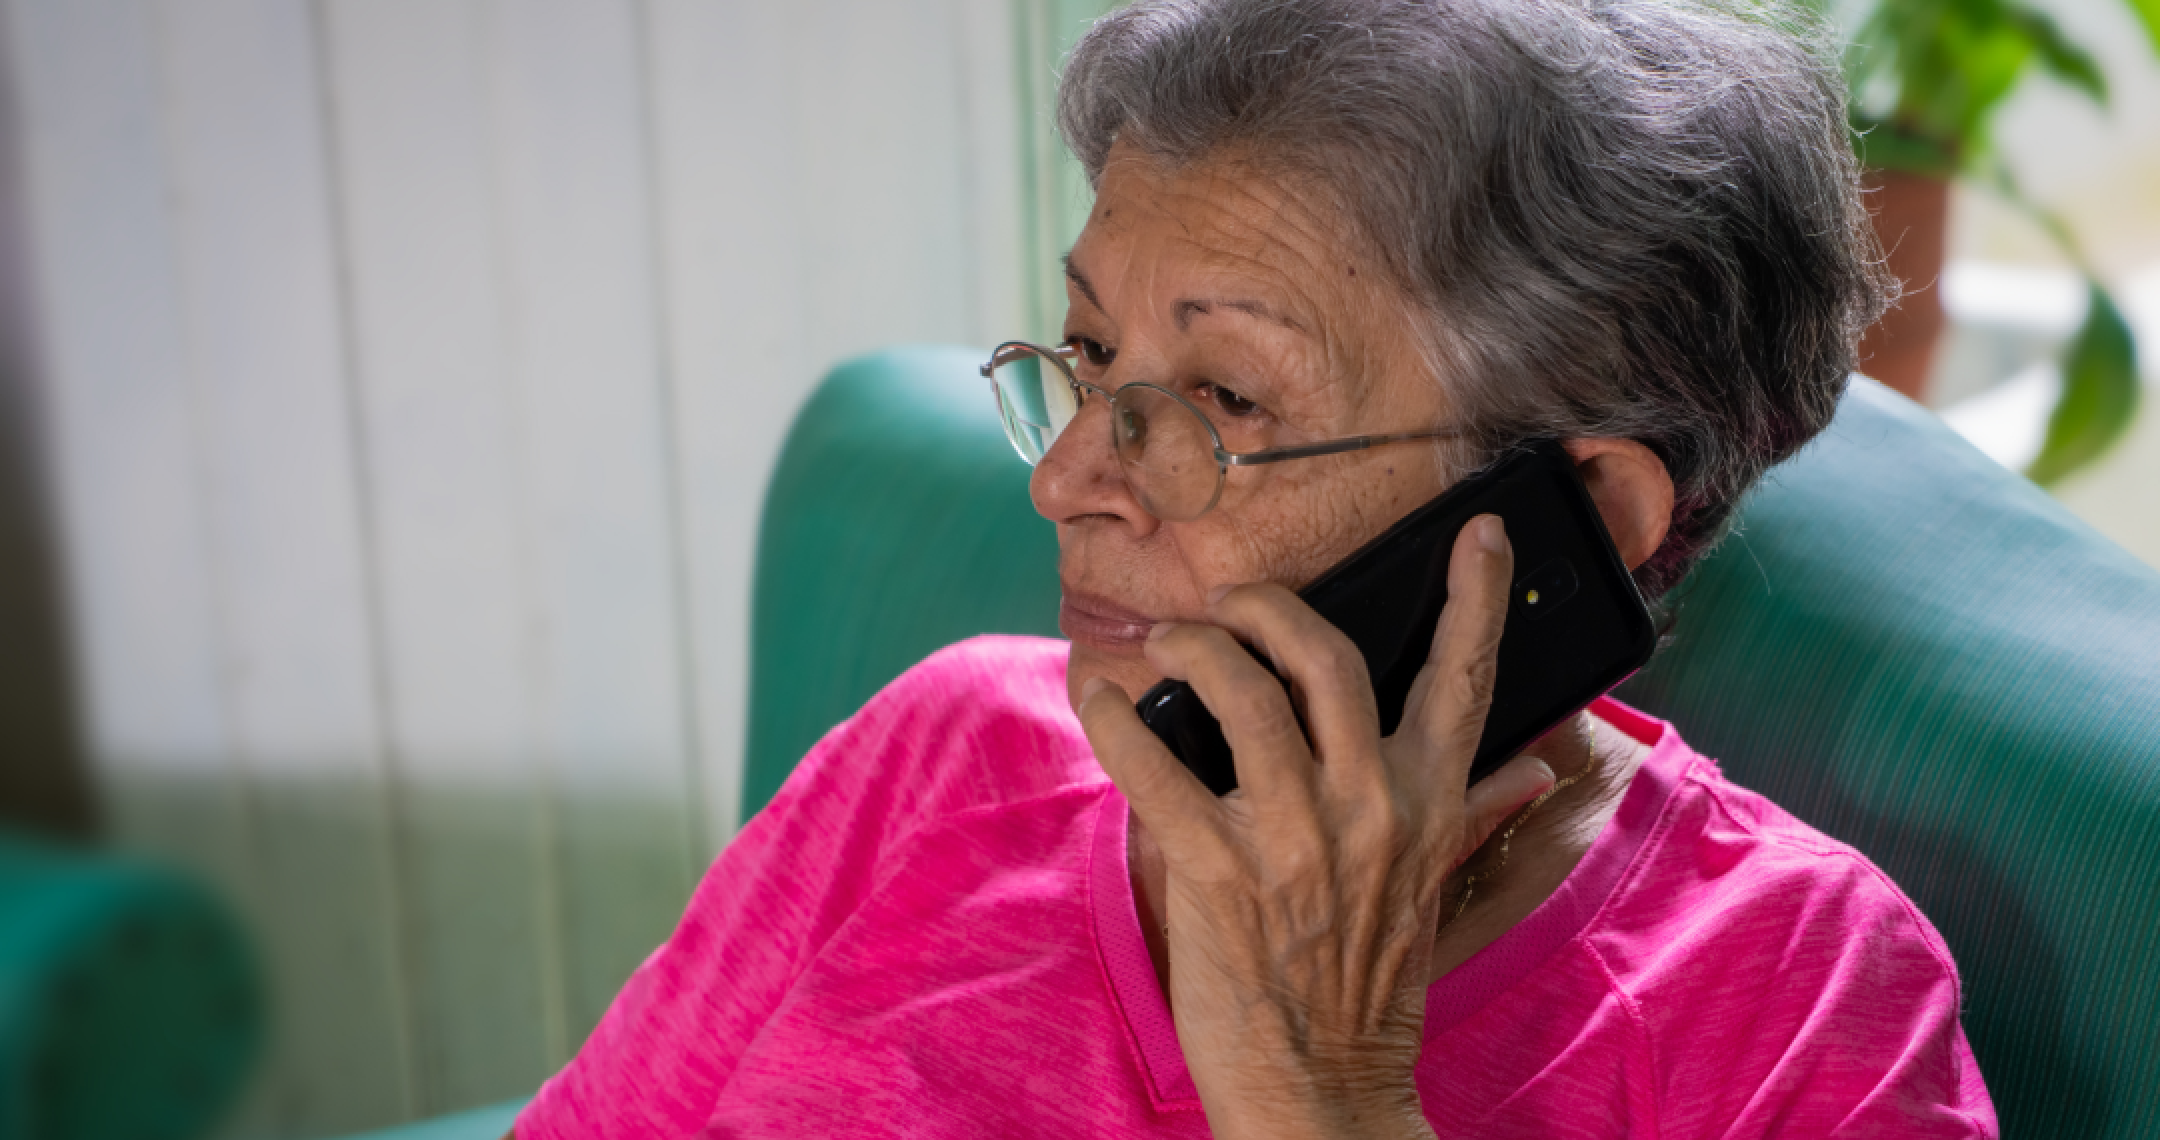 A lady using a mobile phone